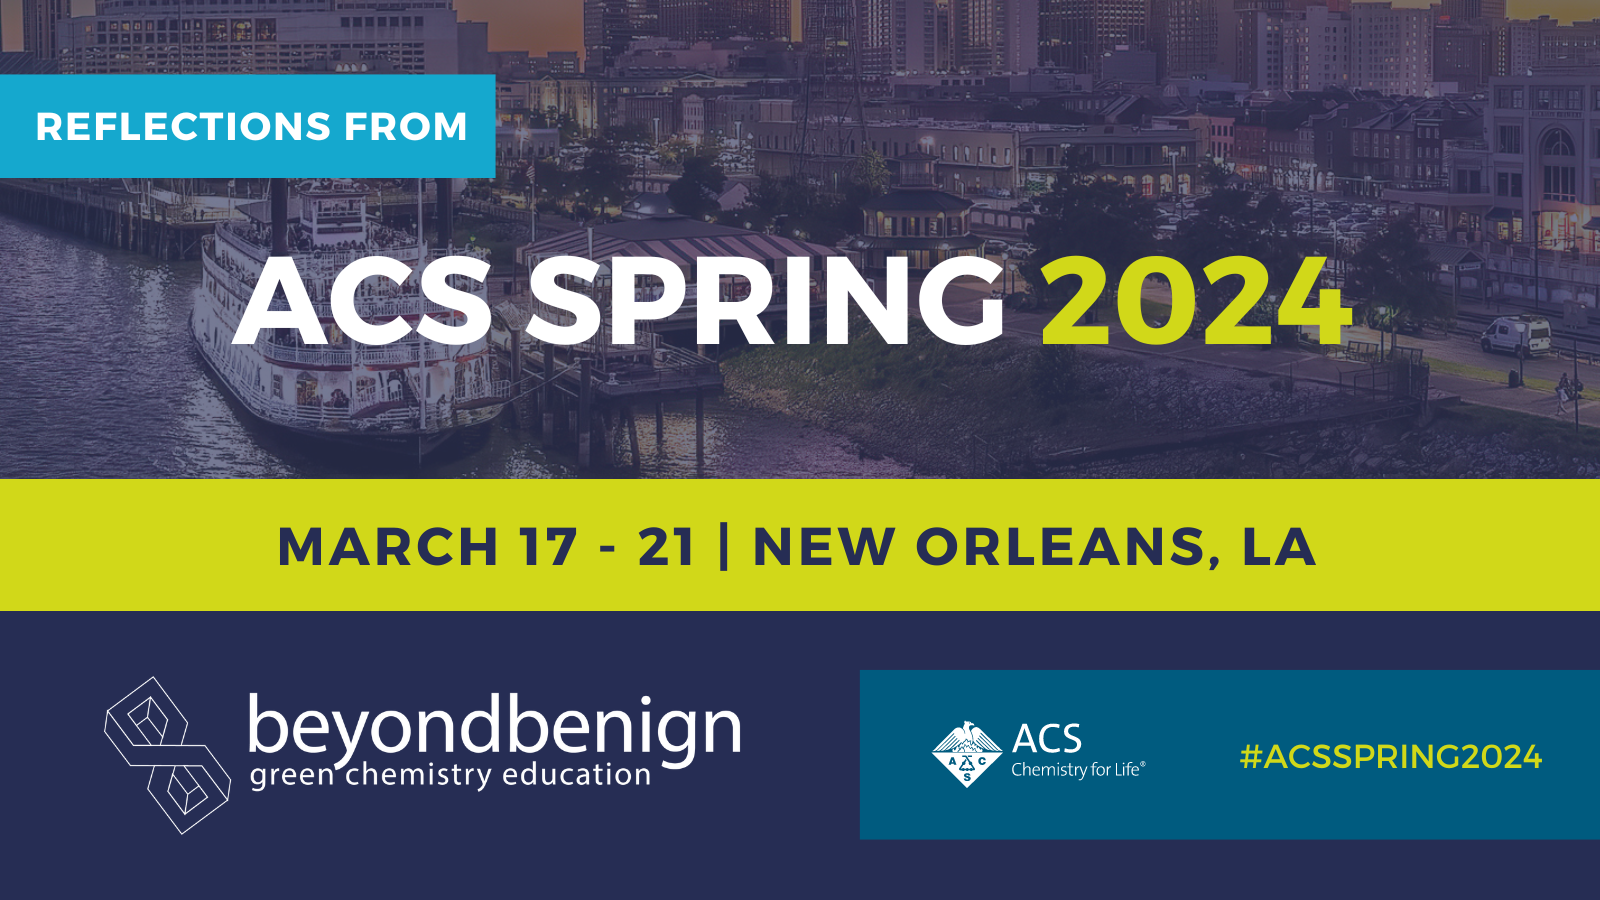 Reflections from ACS Spring 2024. March 17-21